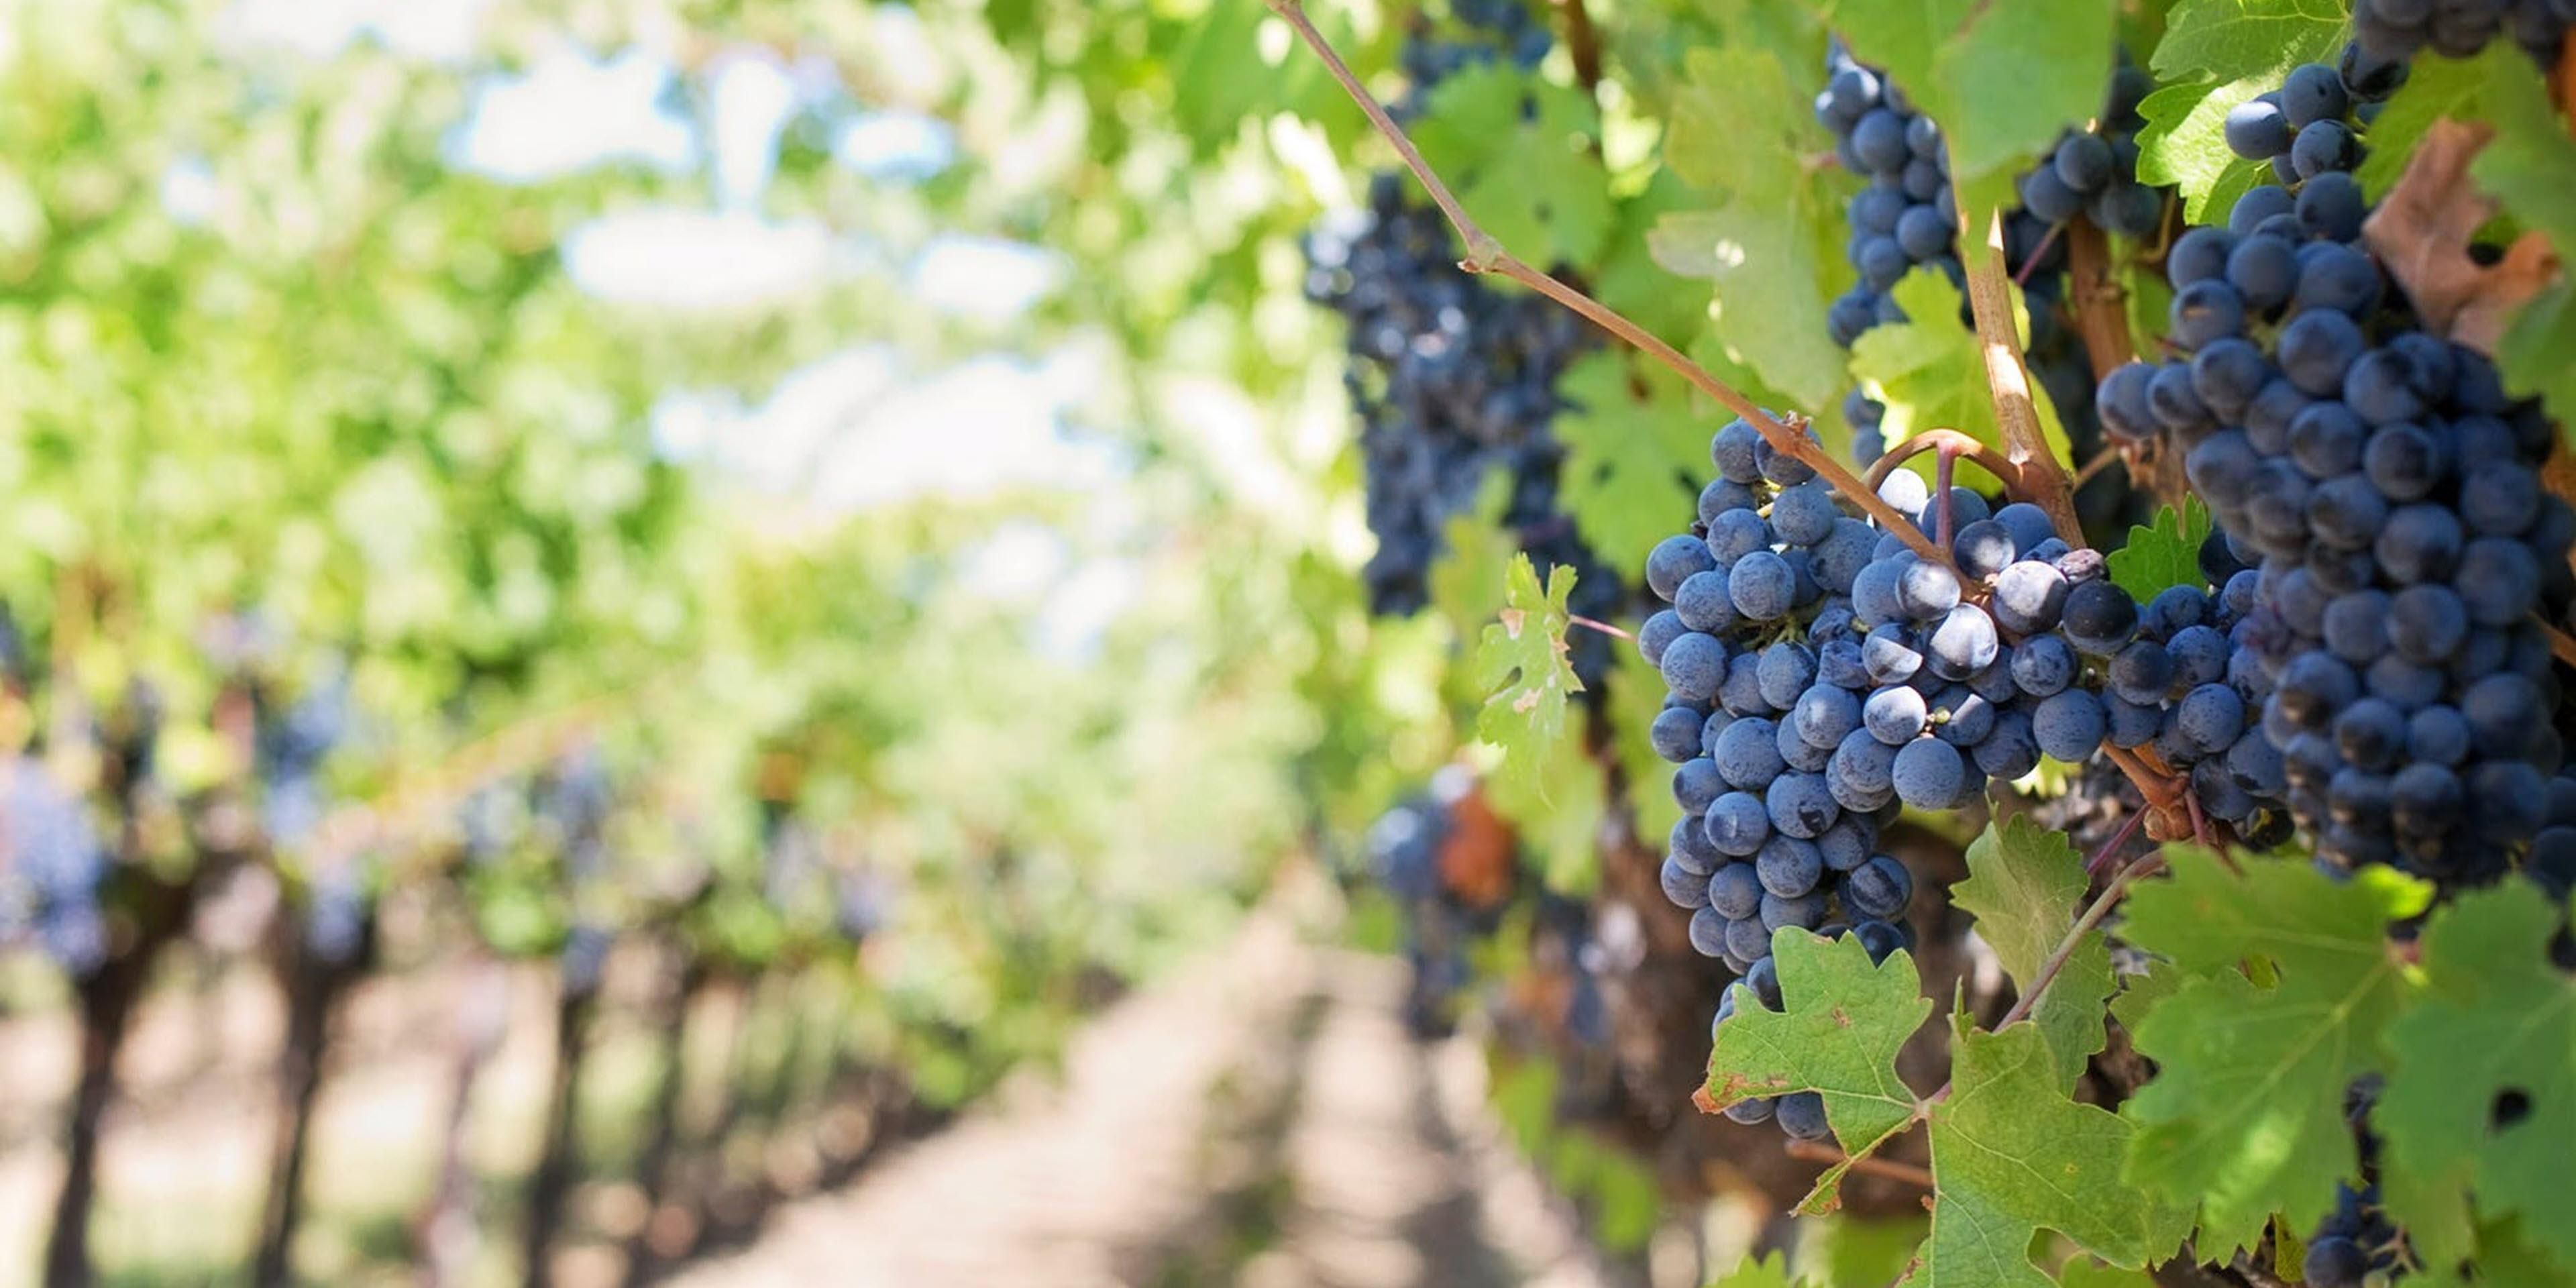 The Temecula Valley is Southern California's Wine Country.
Come visit one of the more than 50 wineries.  Take a behind the scenes tour or simply enjoy the stunning views.